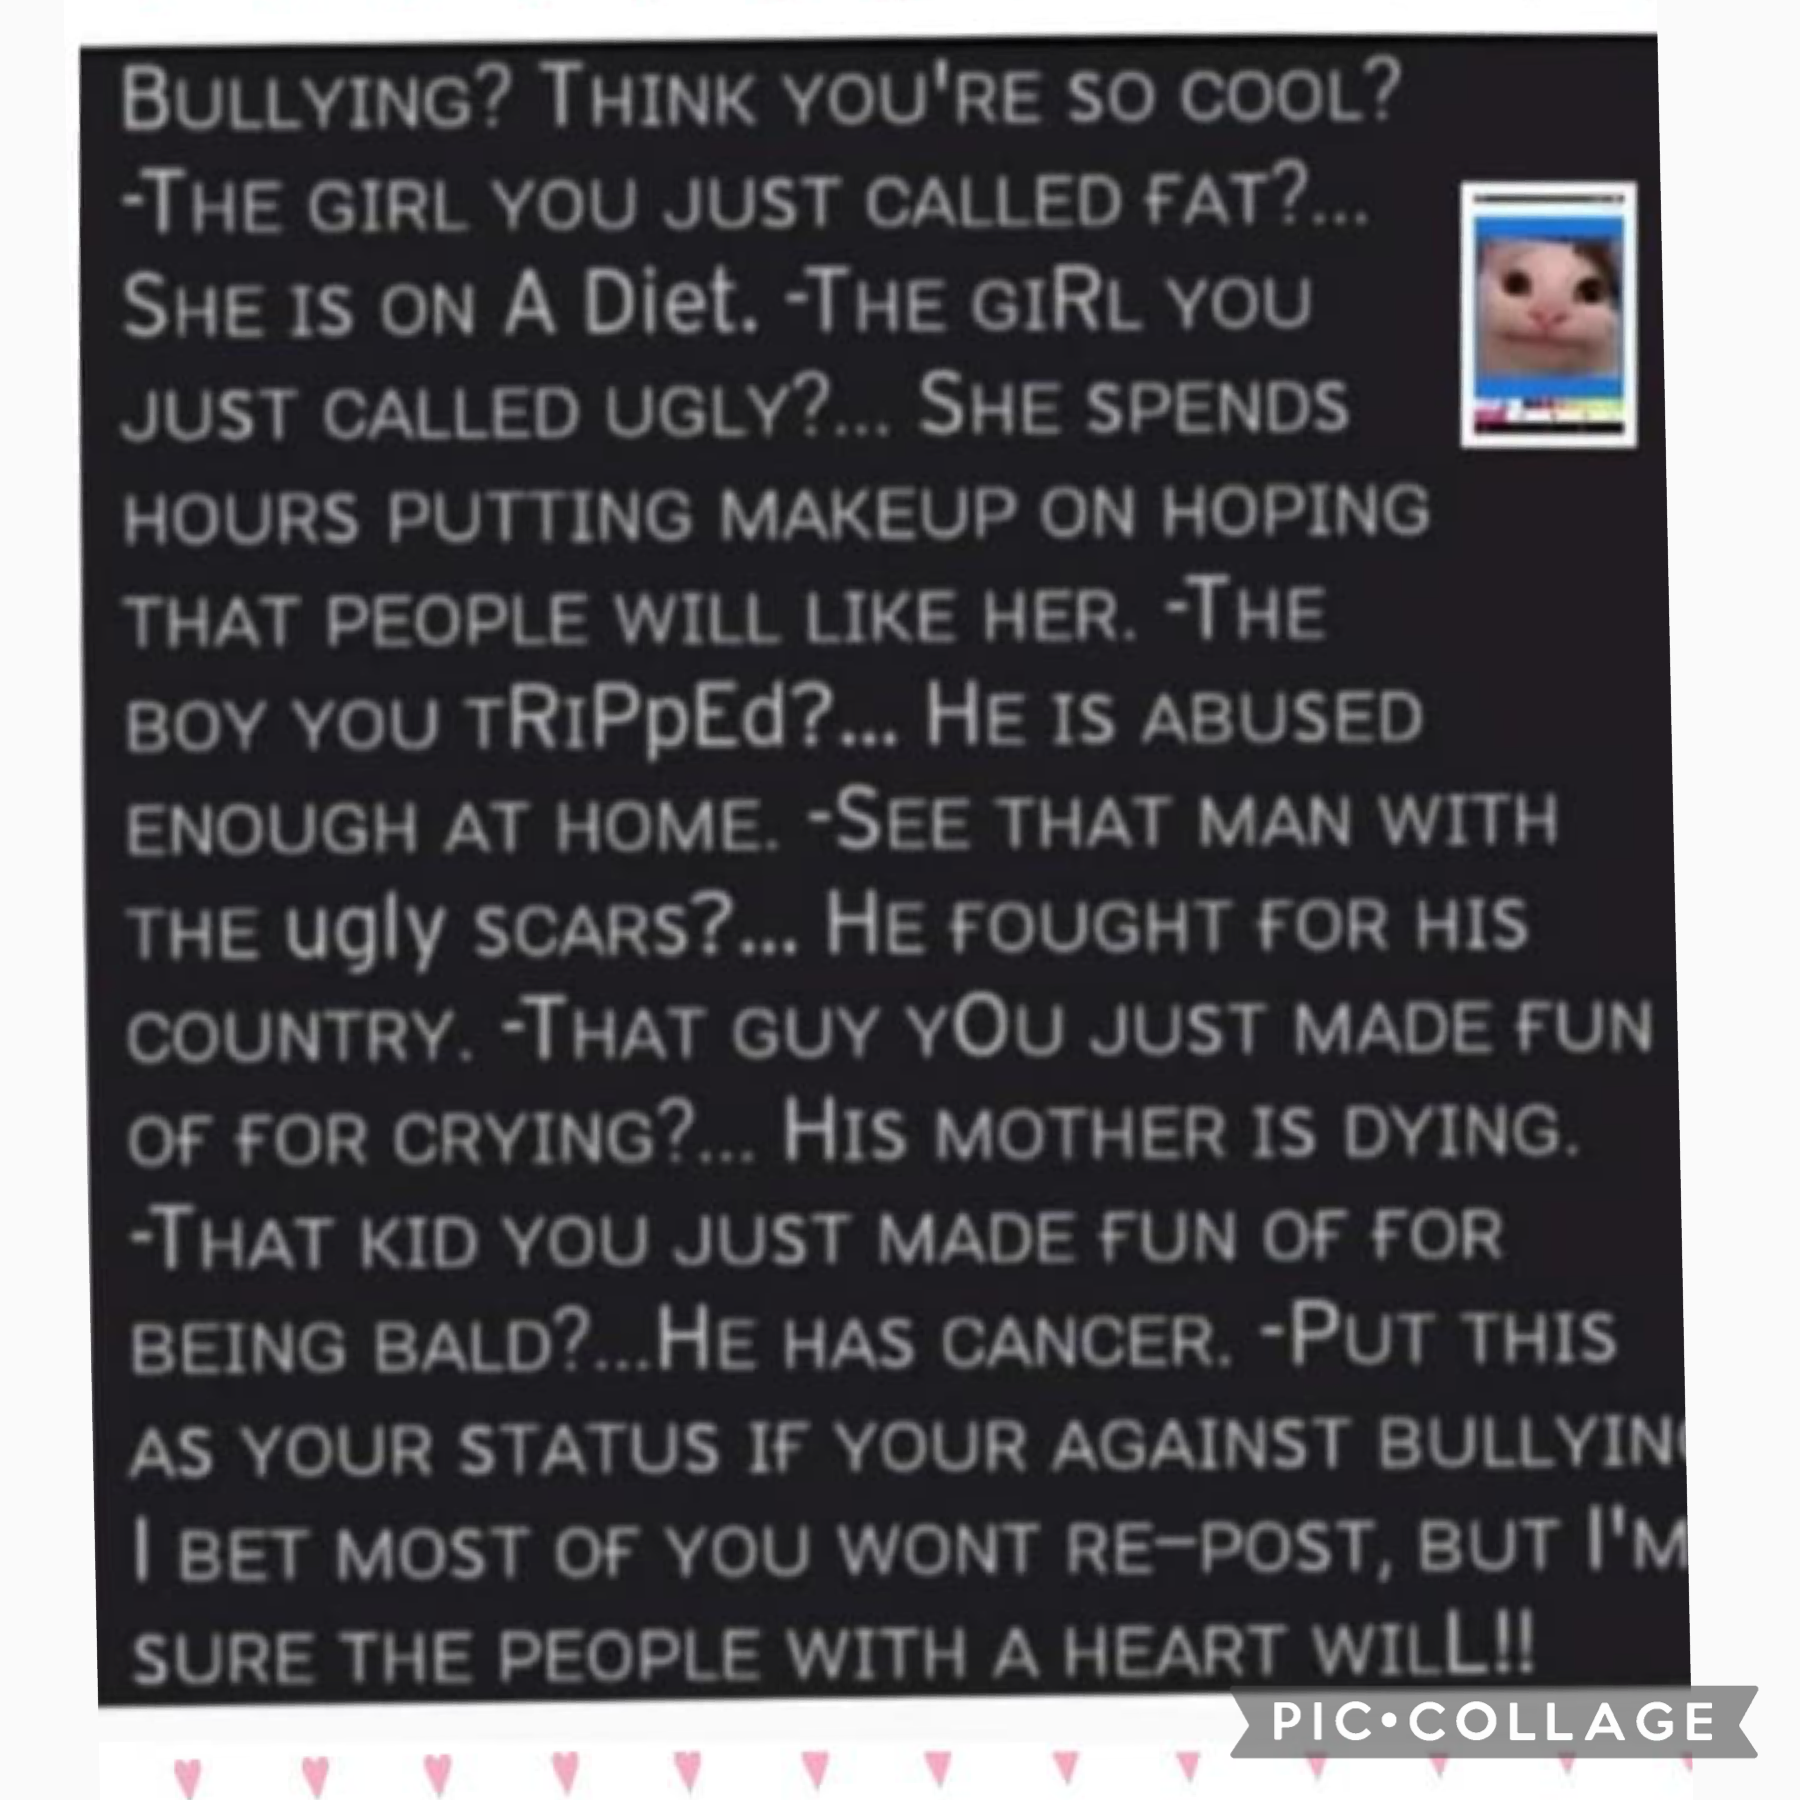 Tell people to stop bullying